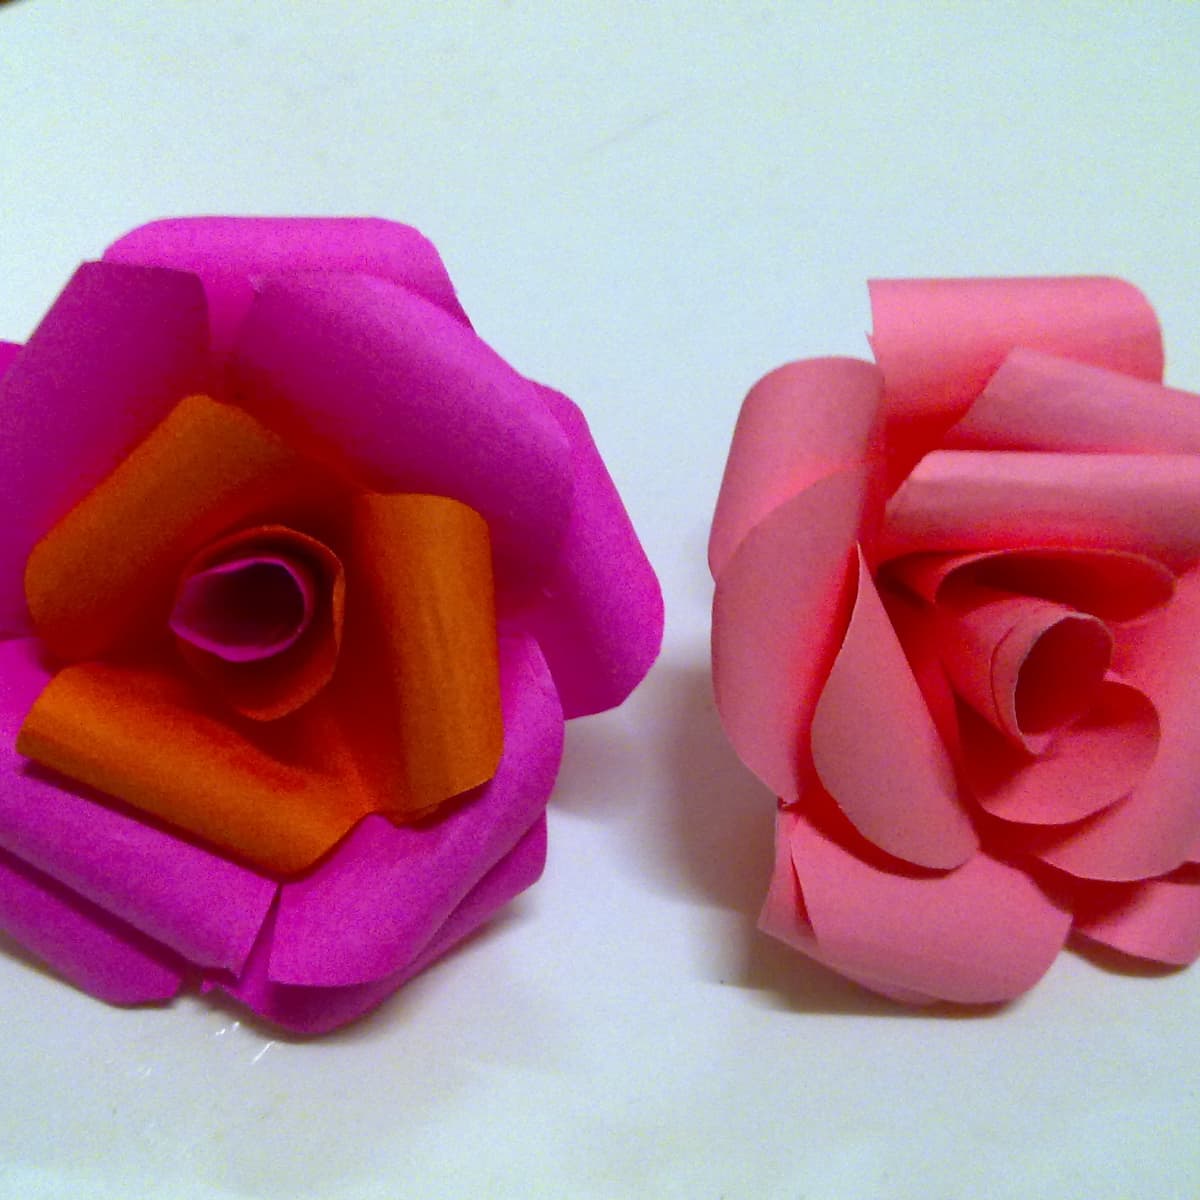 how to make a paper rose step by step